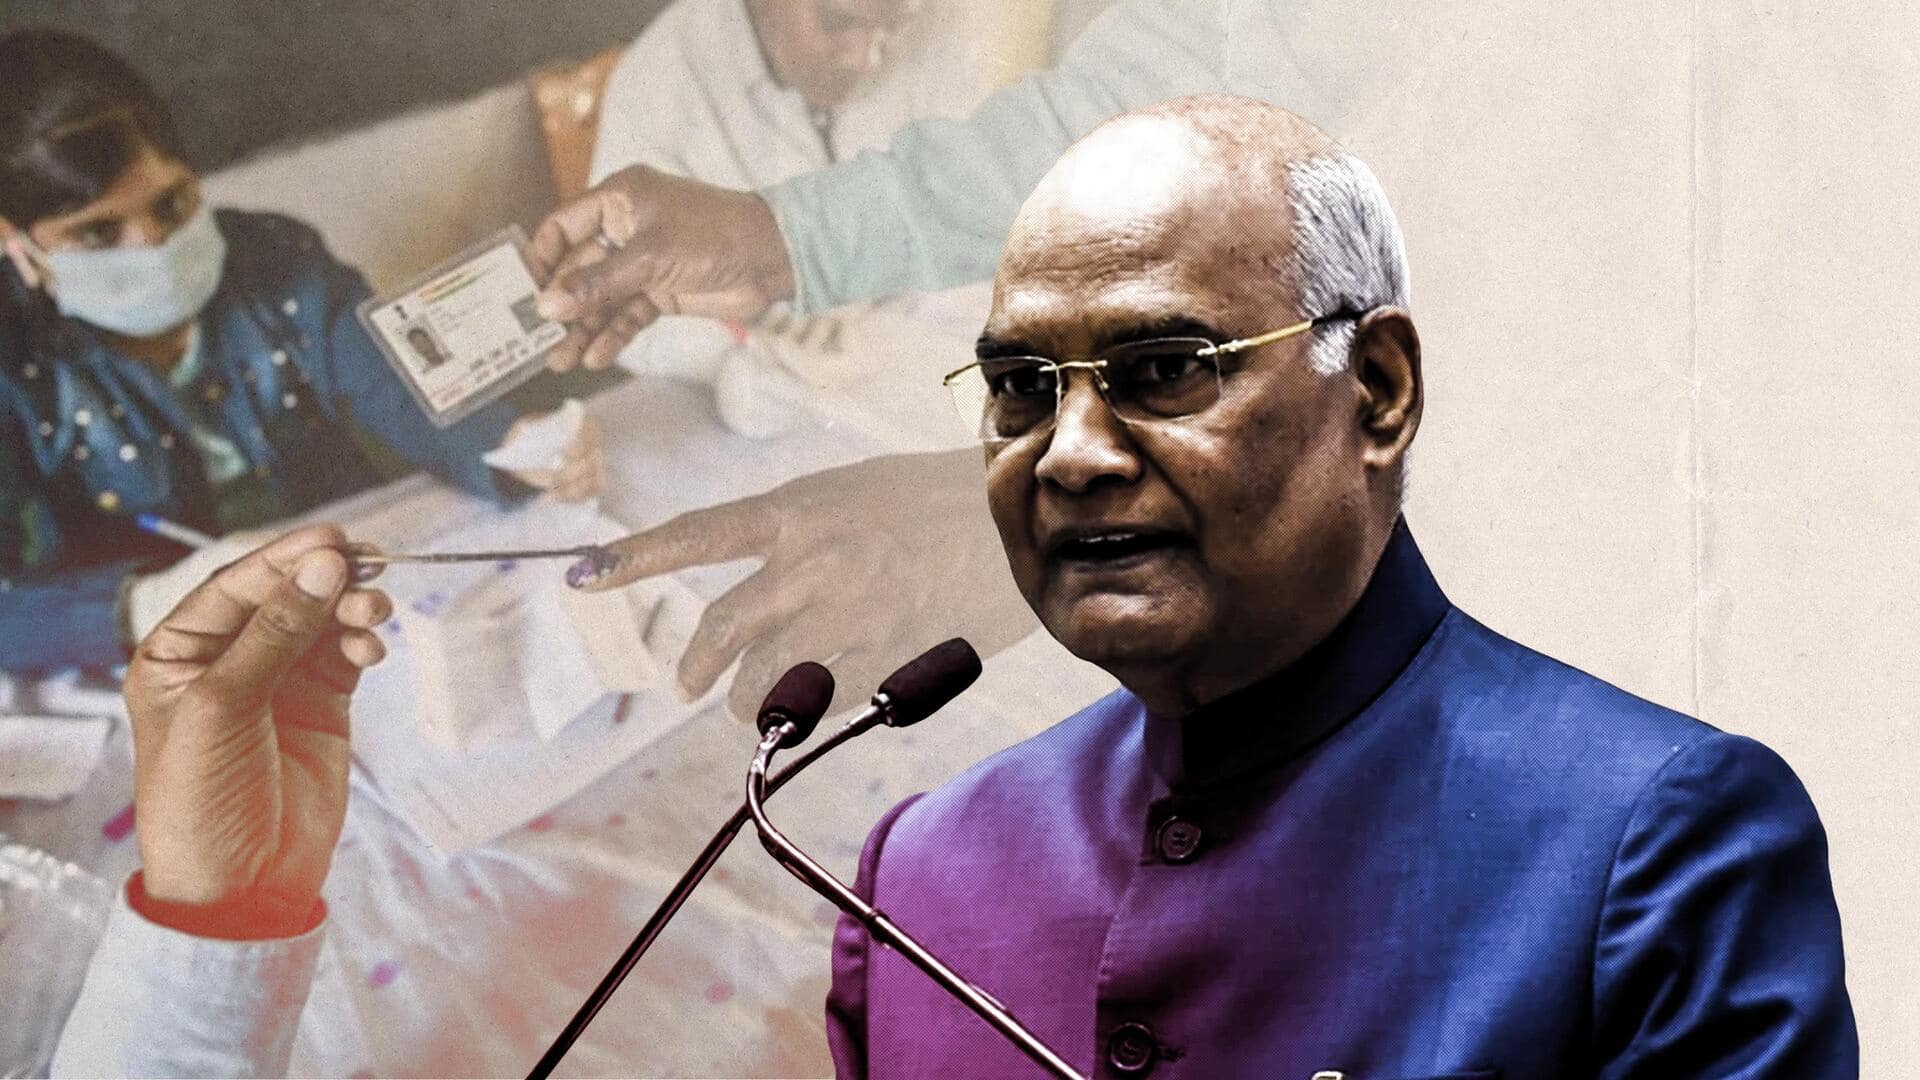 'One Nation One Election' committee formed, Kovind to head panel